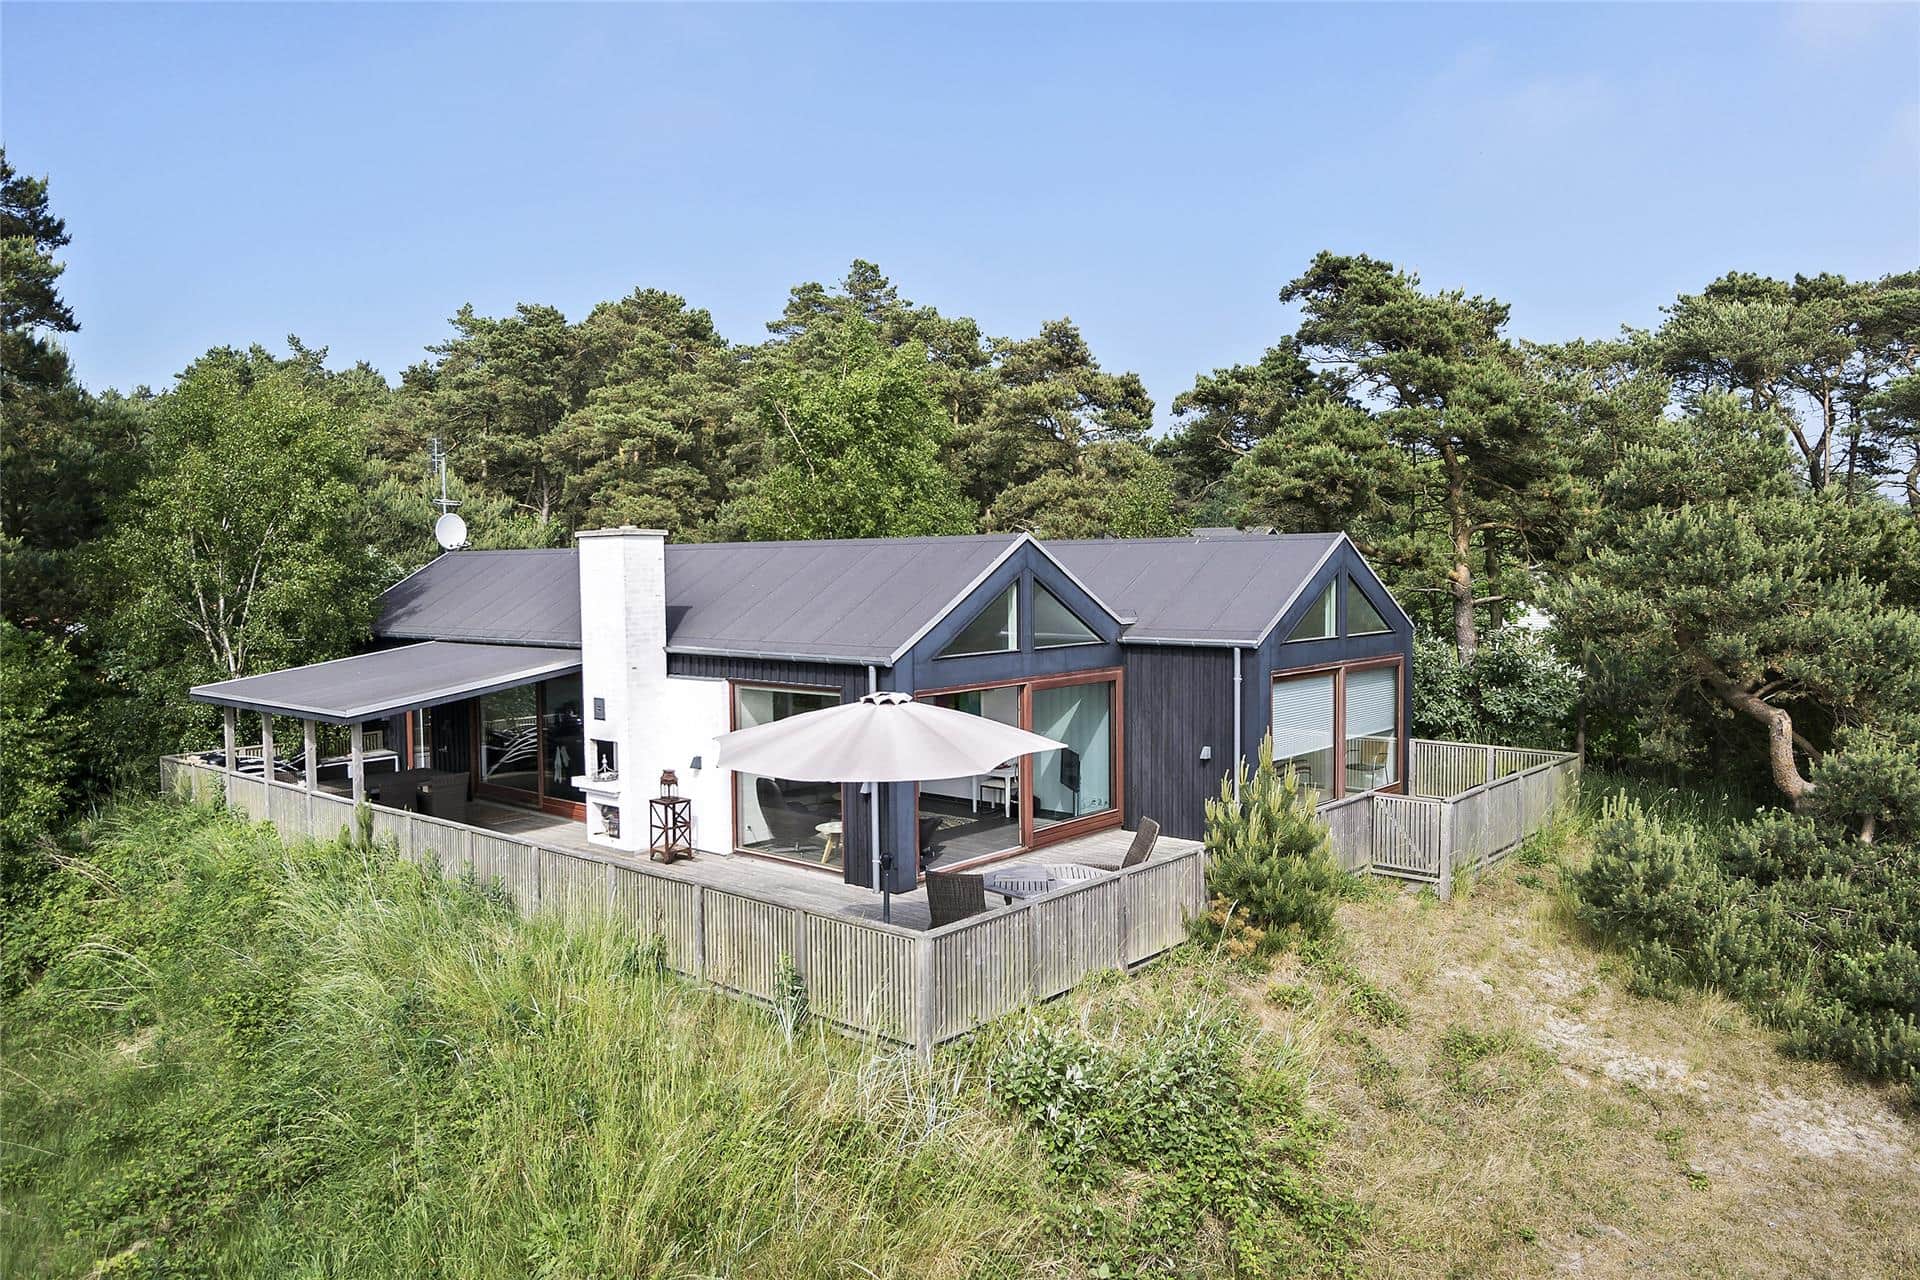 Image 0-10 Holiday-home 1328, Poserevænget 34, DK - 3720 Aakirkeby